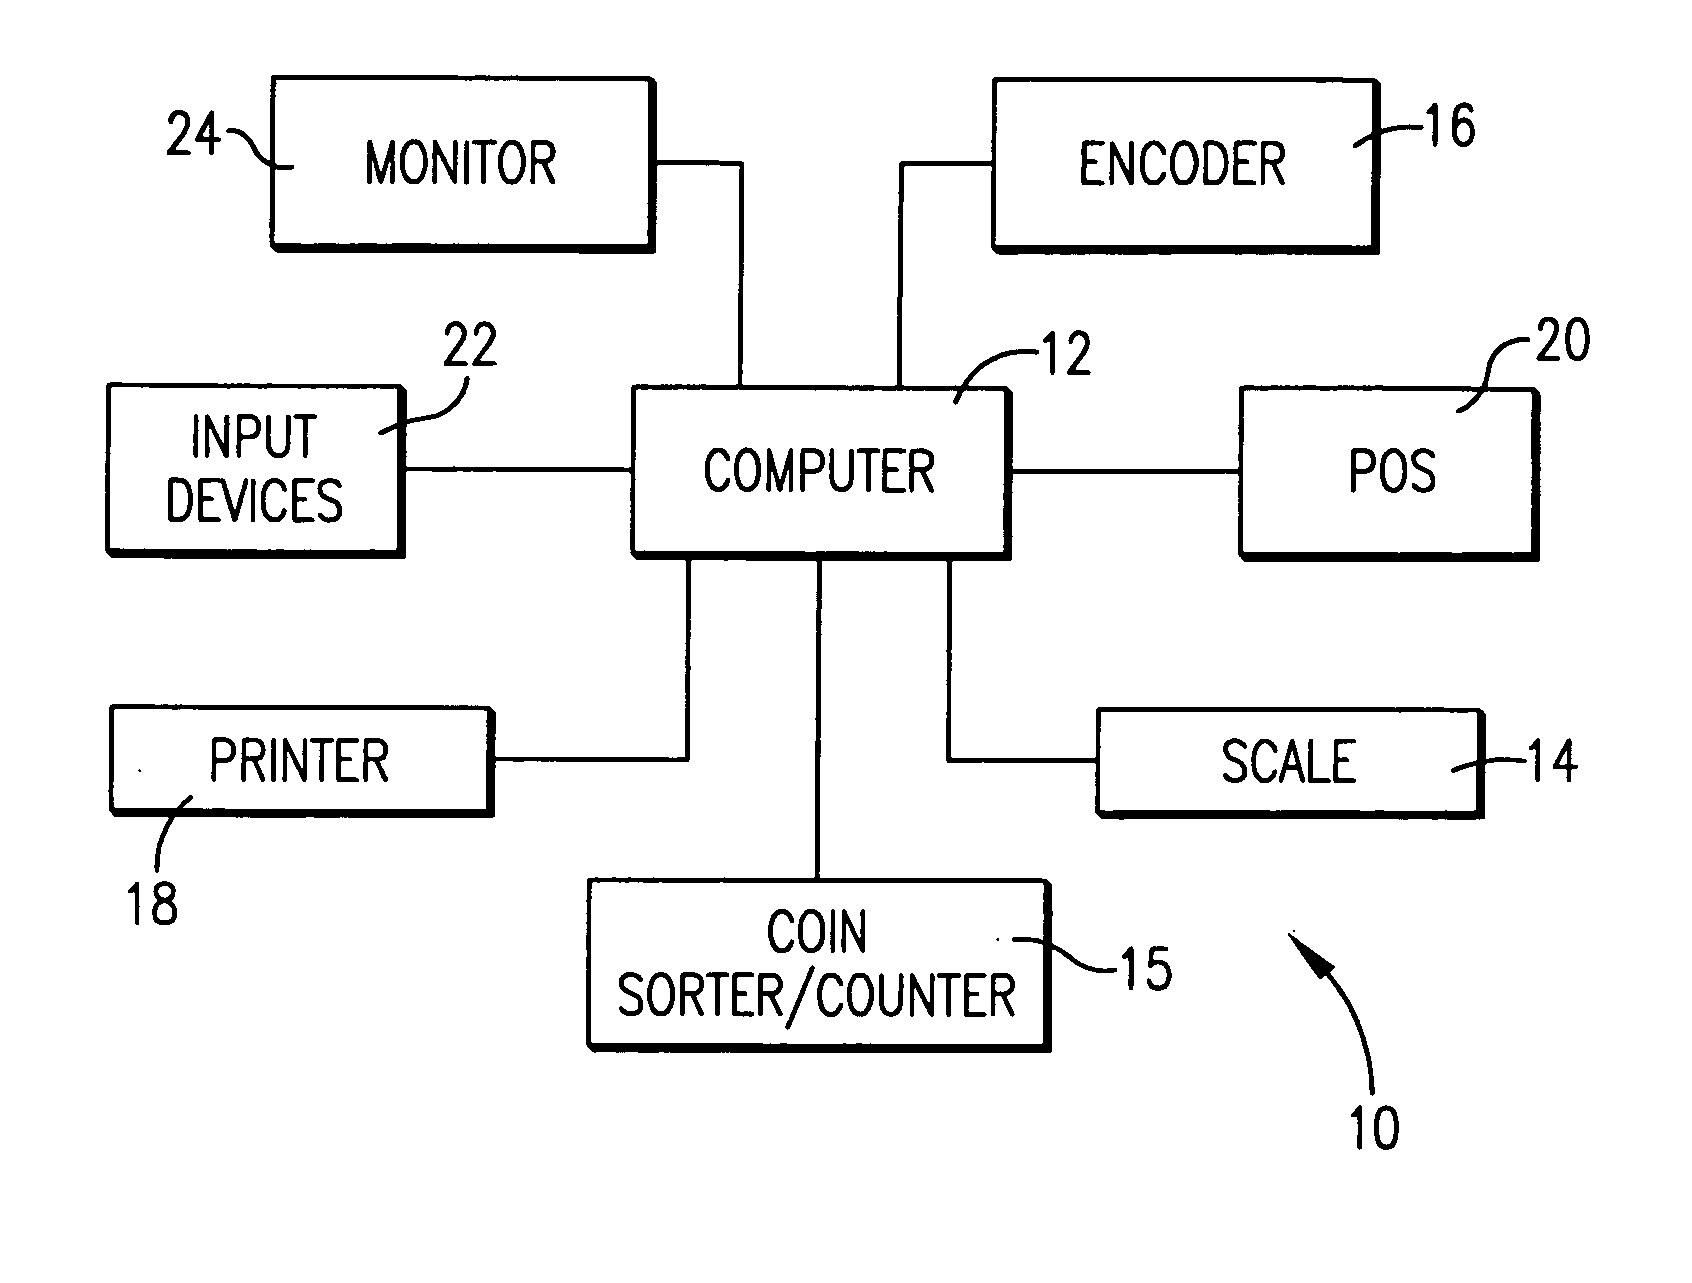 Method and computer program for building and replenishing cash drawers with coins from used coin containers